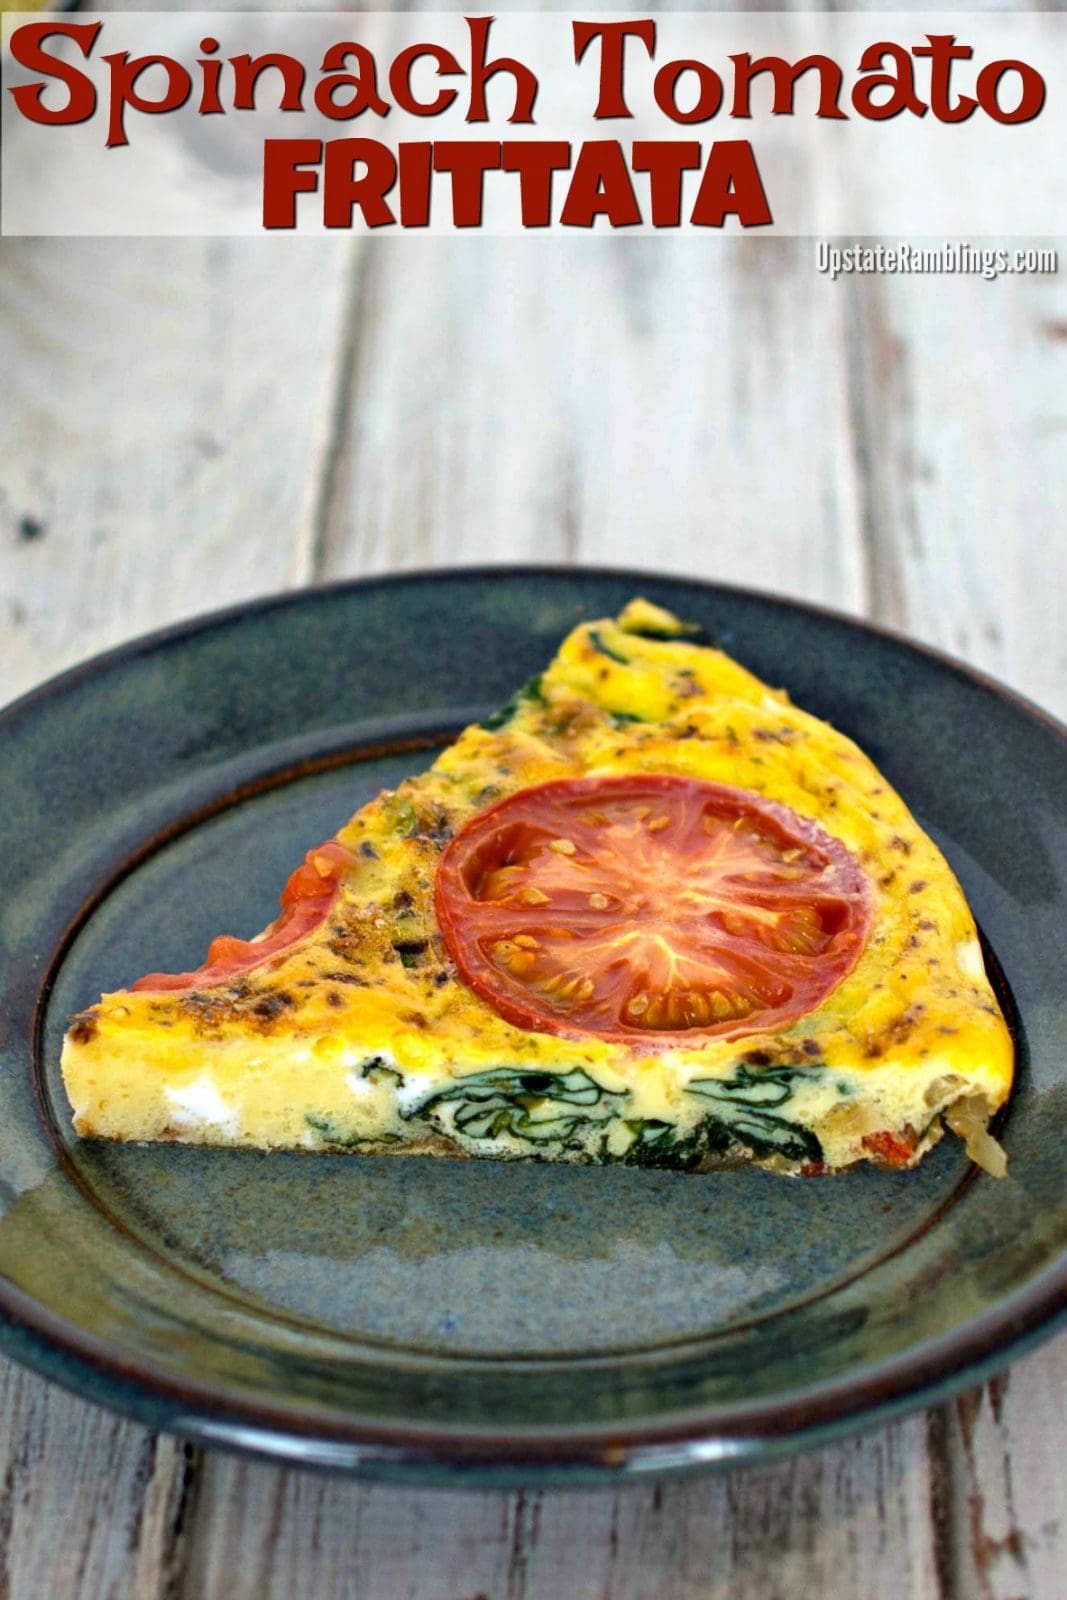 Vegetable Frittata with Spinach and tomatoes